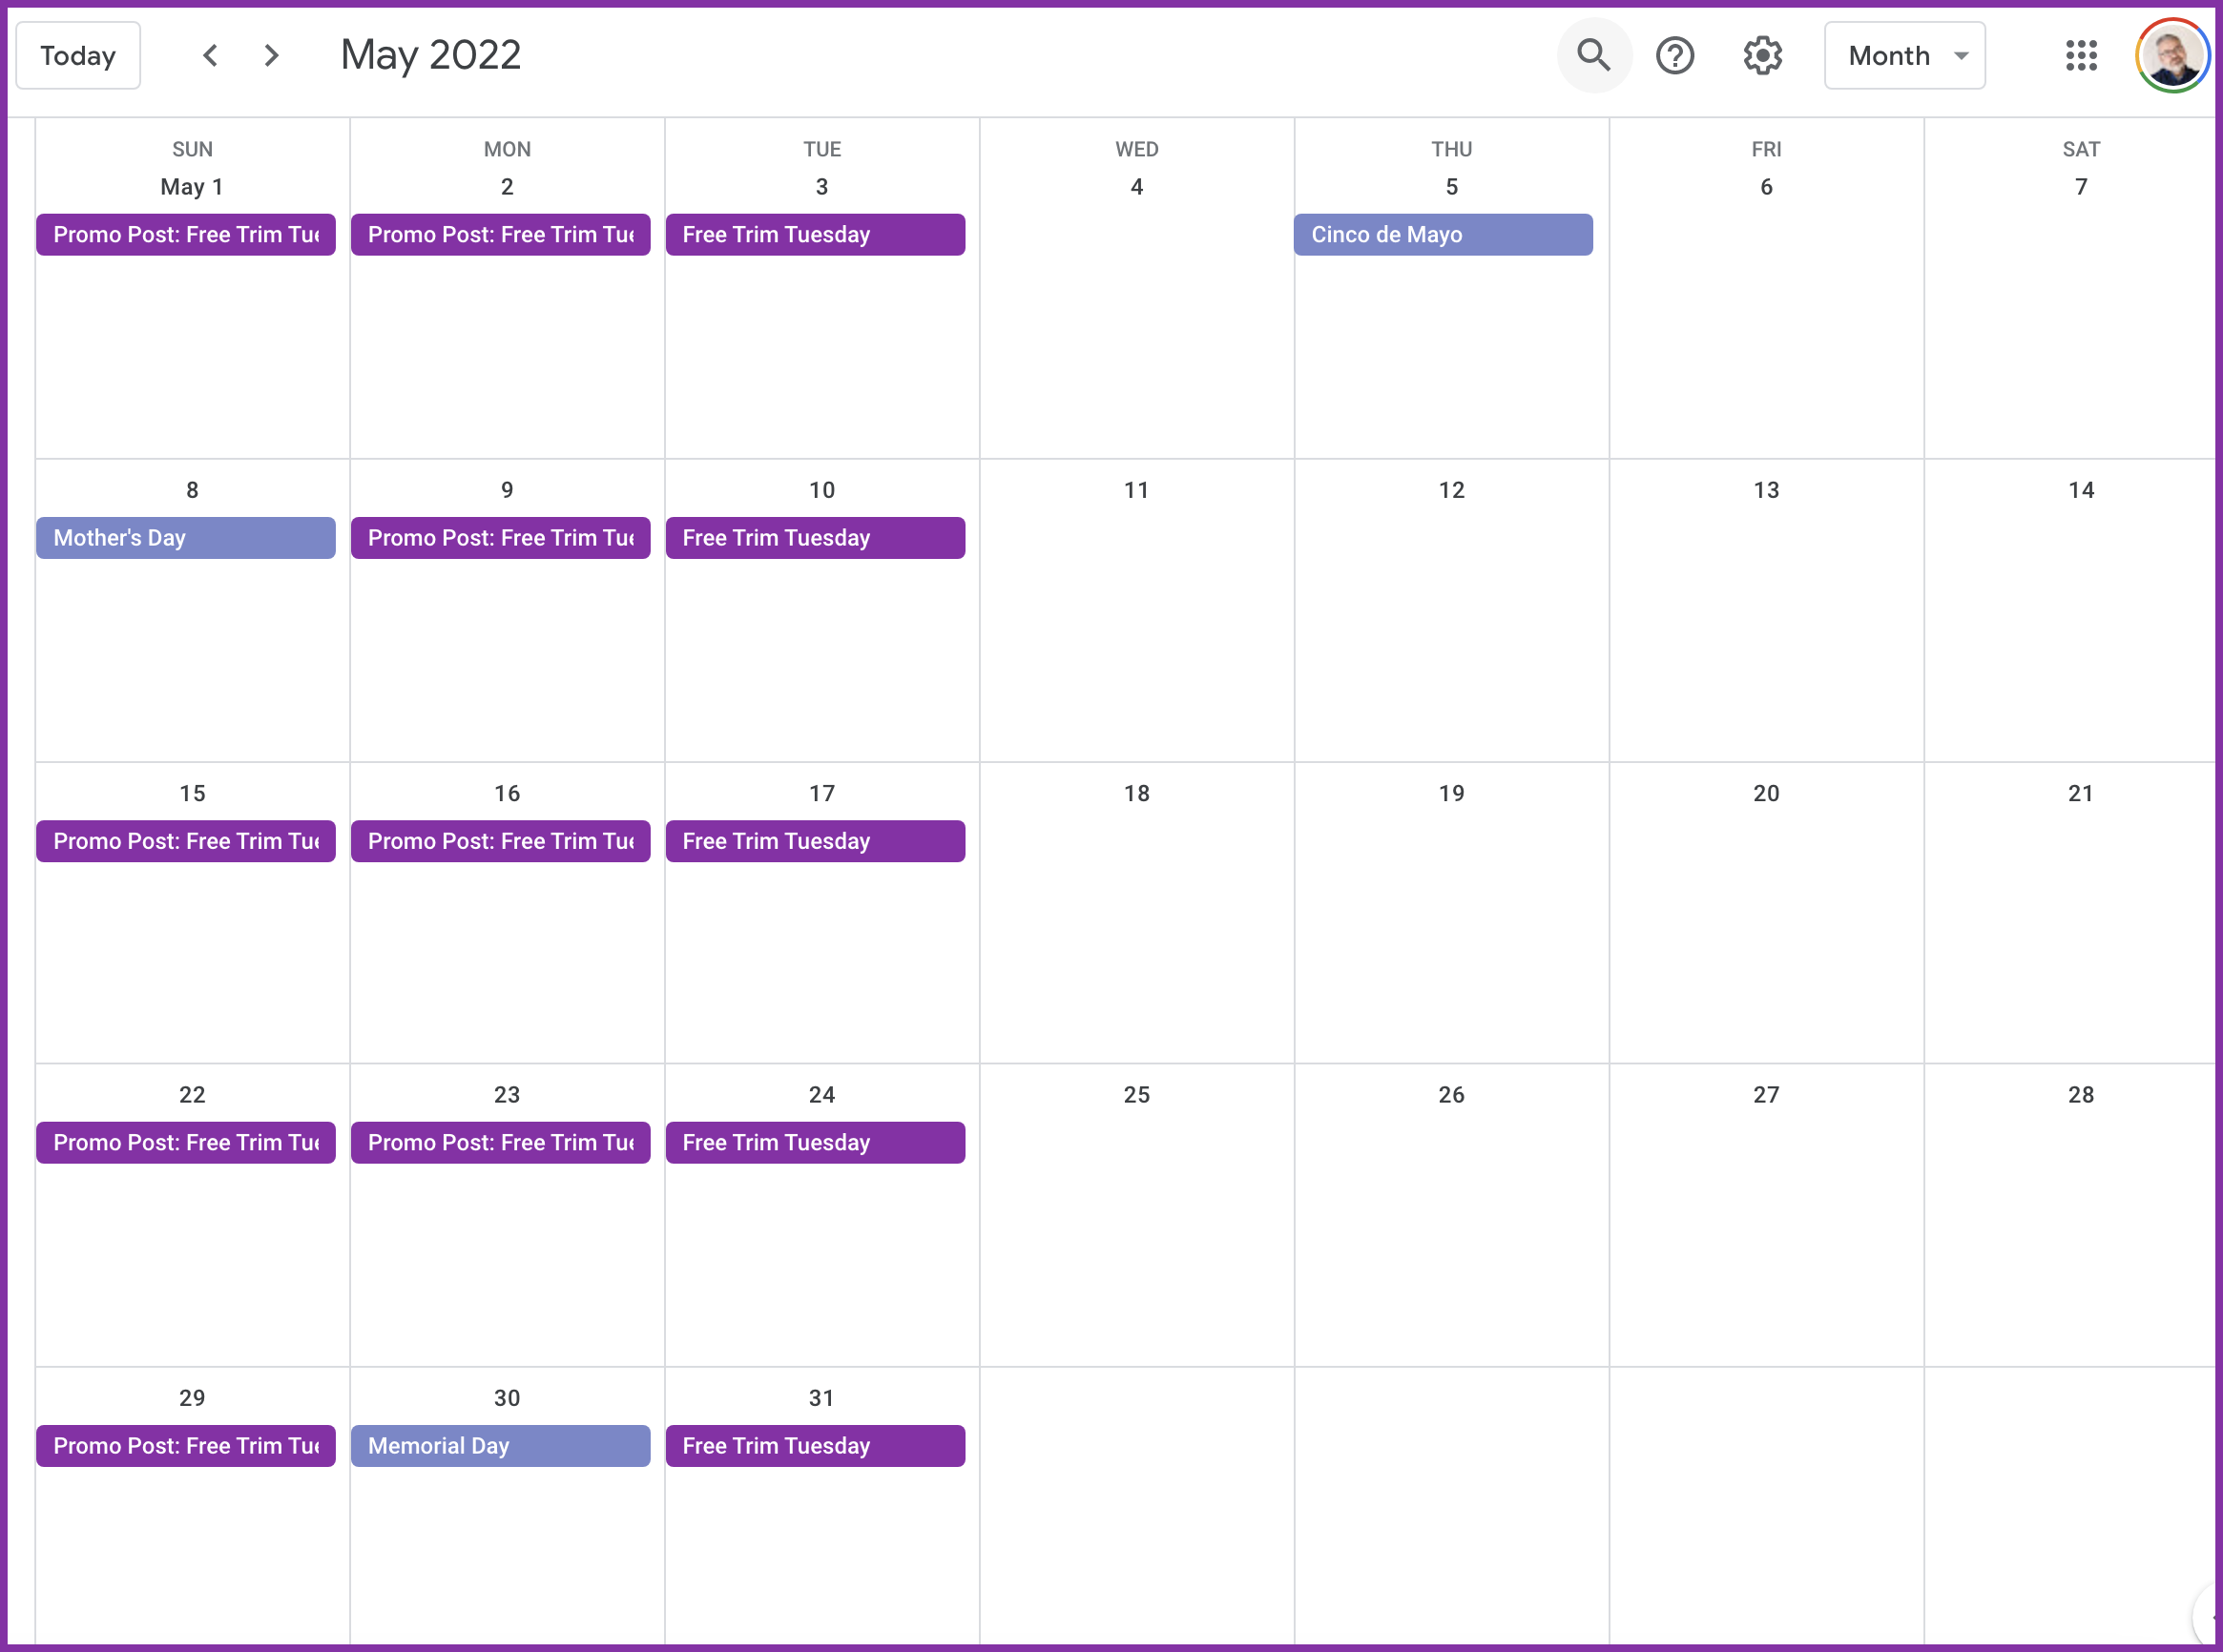 Adding special events and product launches to your social media content calendar